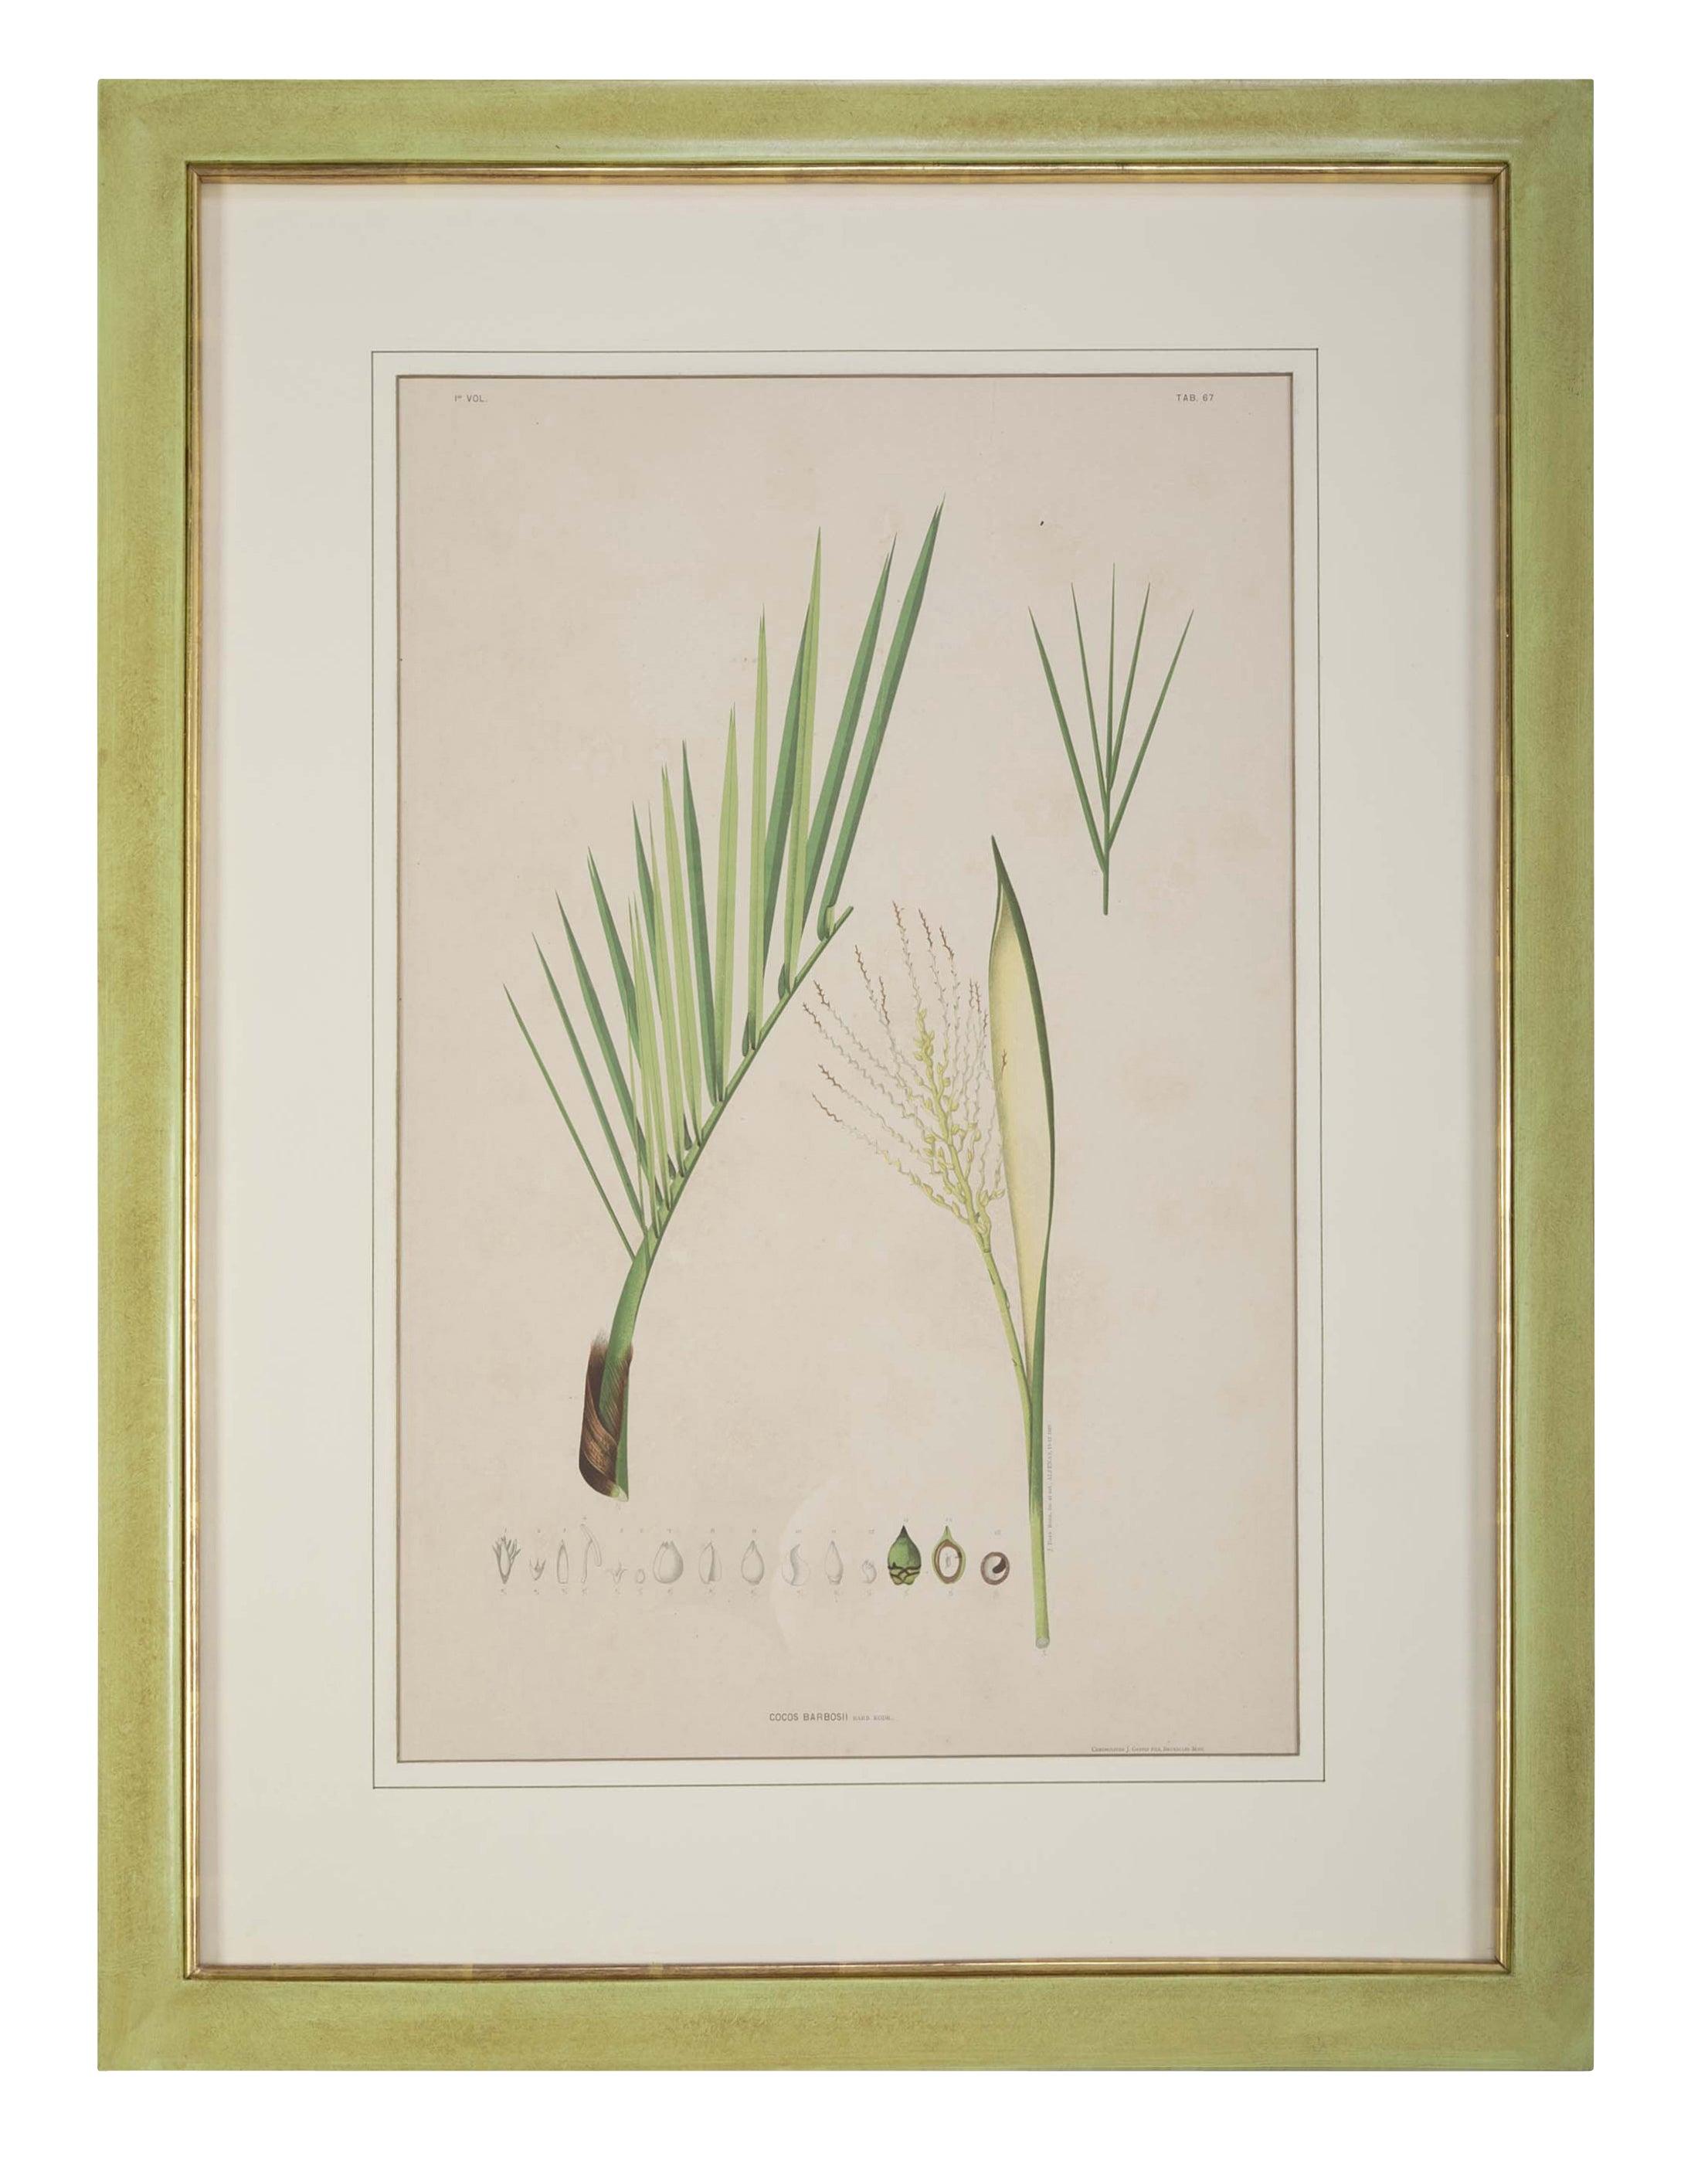 Chromolithographs of Brazilian Palms by Joao Barbosa Rodrigues